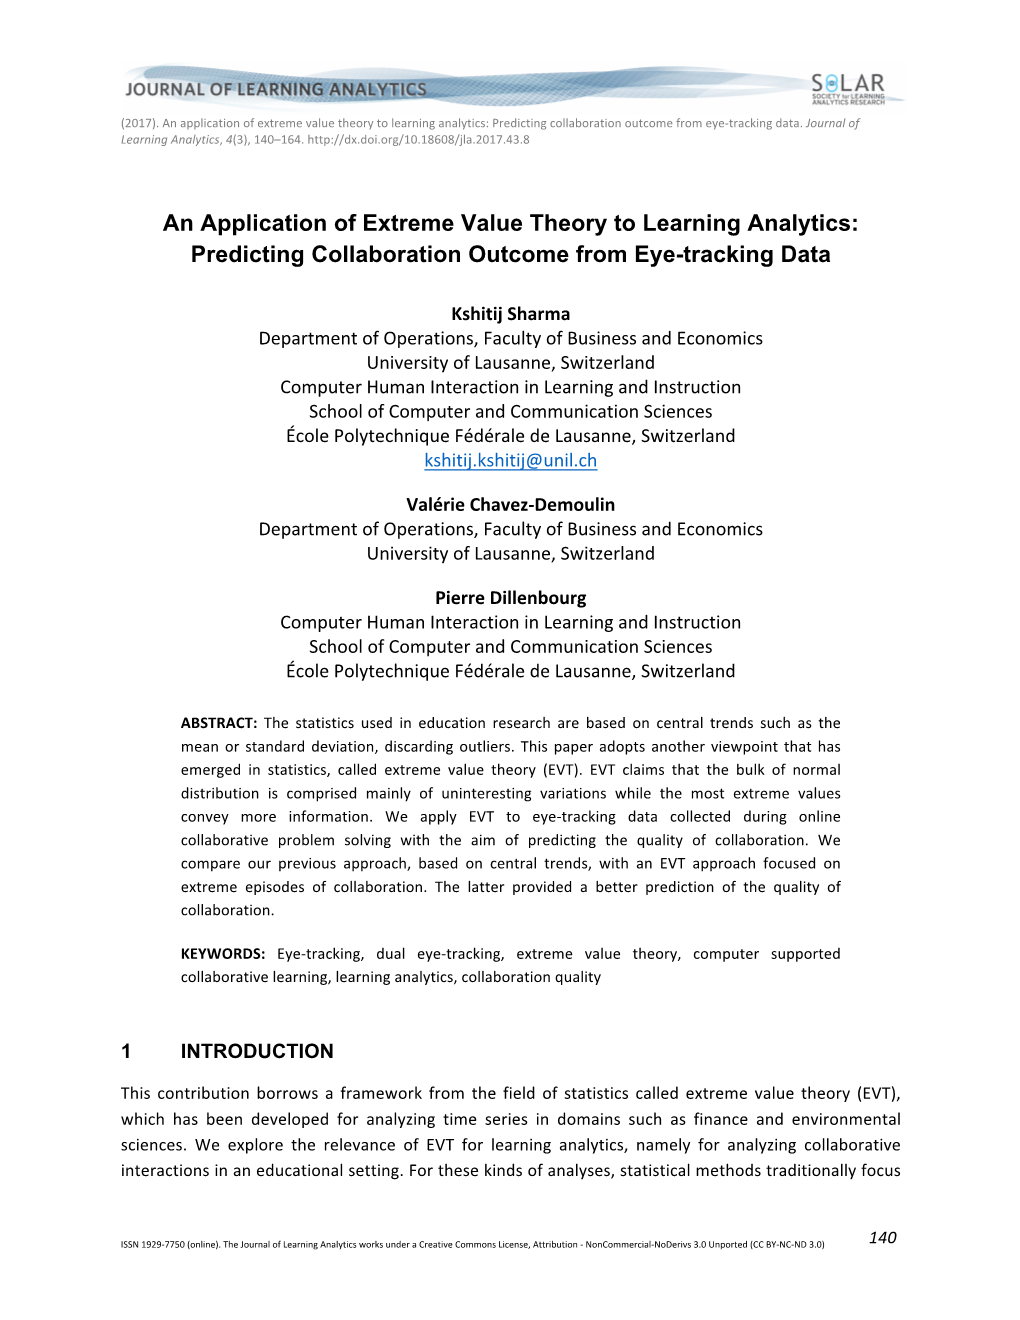 An Application of Extreme Value Theory to Learning Analytics: Predicting Collaboration Outcome from Eye-Tracking Data